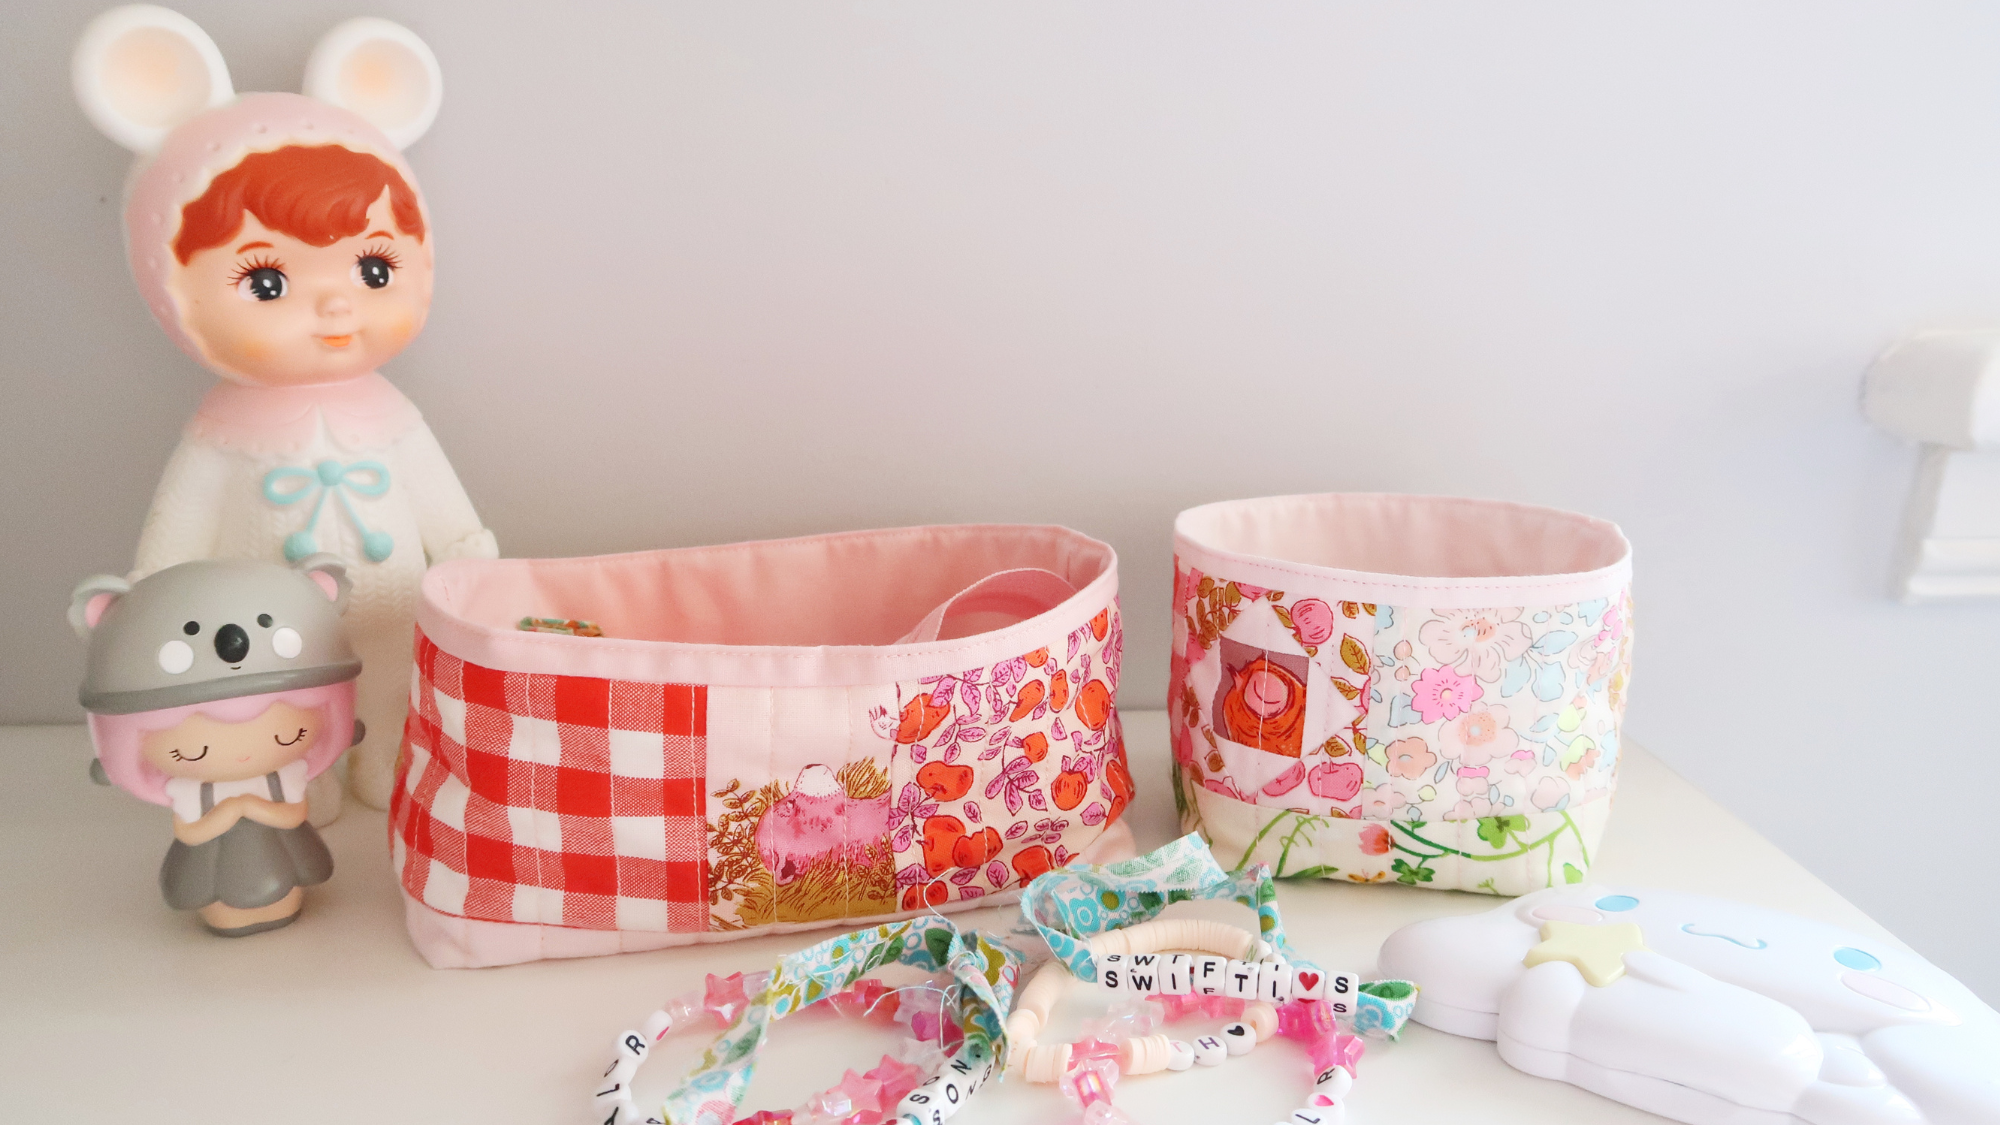 Super Simple Basket - sewing pattern and video tutorial for beginners